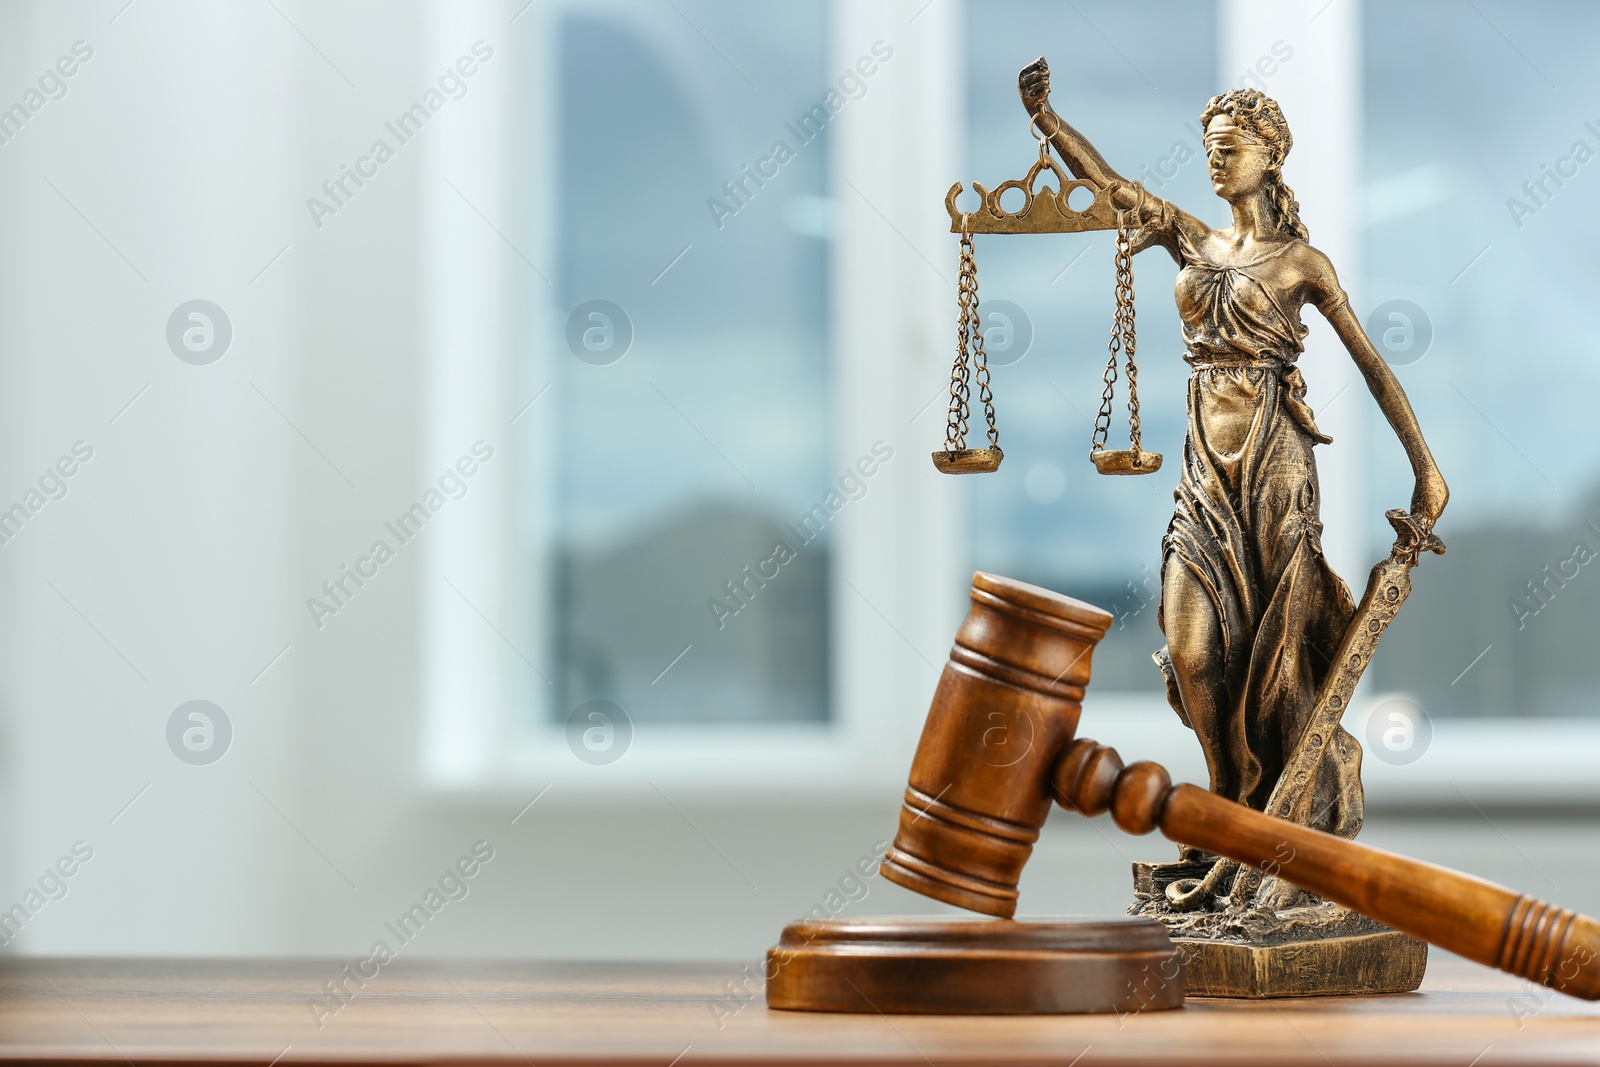 Photo of Figure of Lady Justice and gavel on wooden table indoors, space for text. Symbol of fair treatment under law